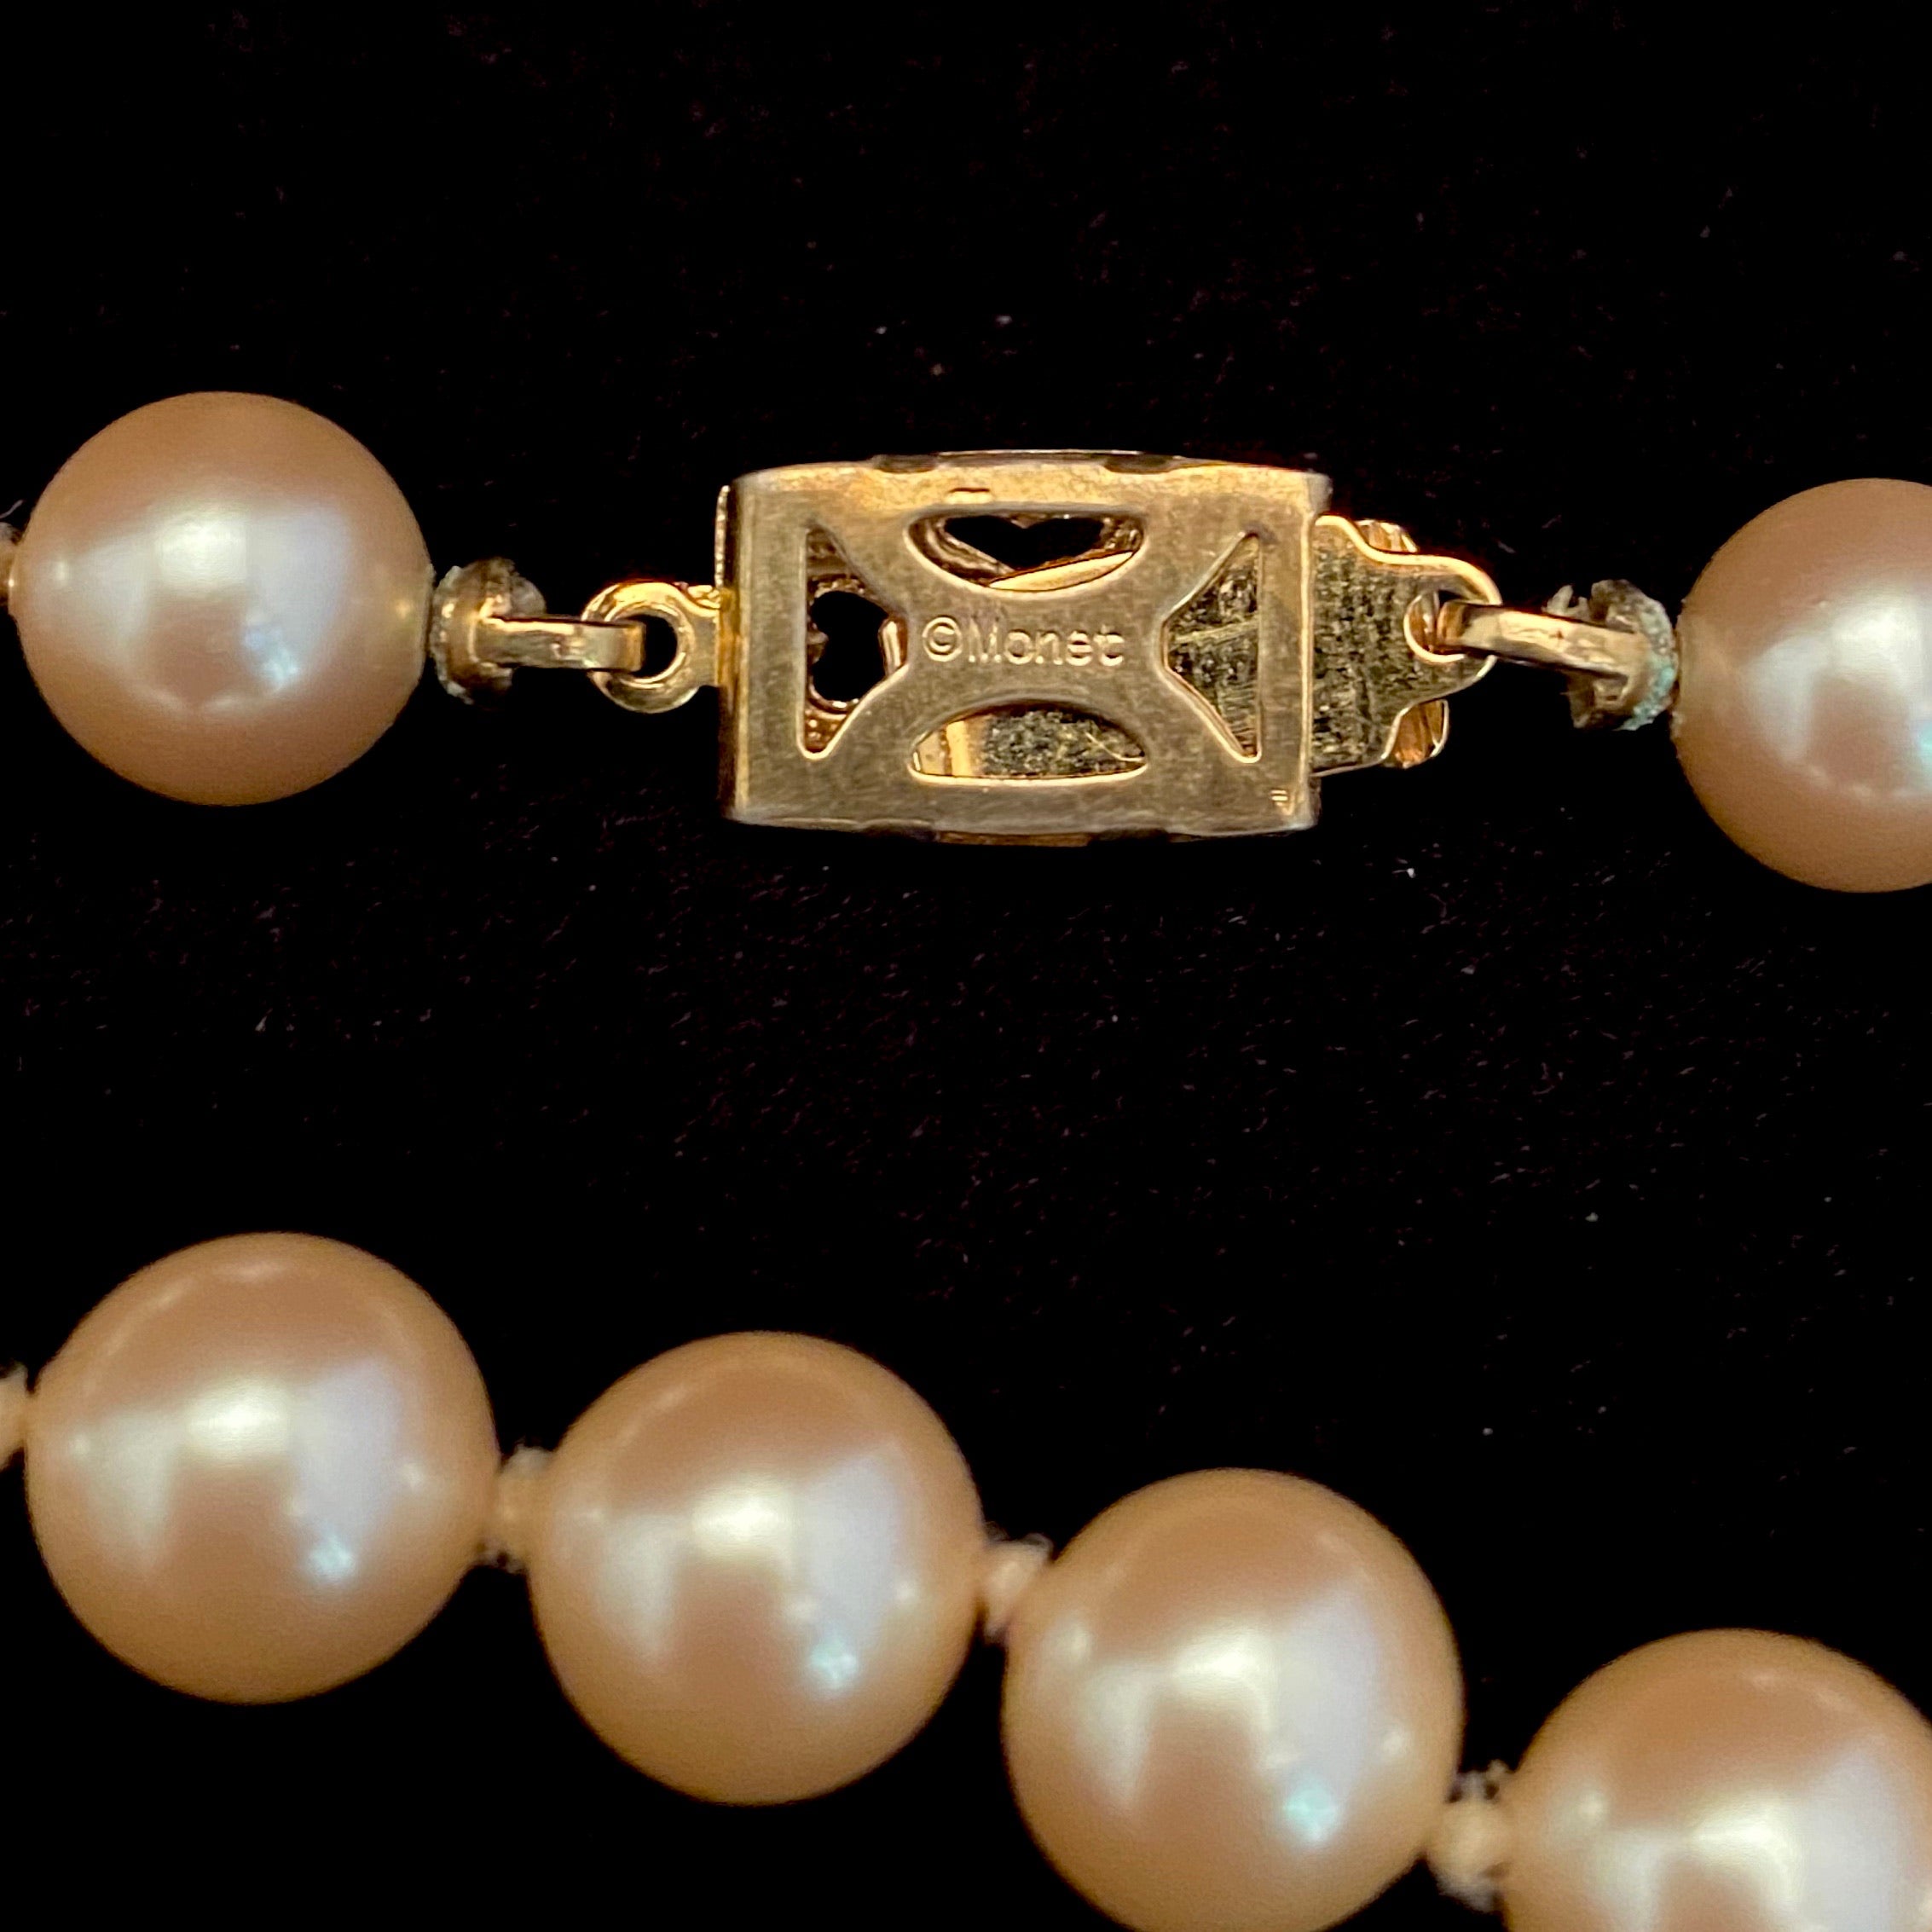 Vintage Monet omega gold chain with pearl and enamel pendant center 18